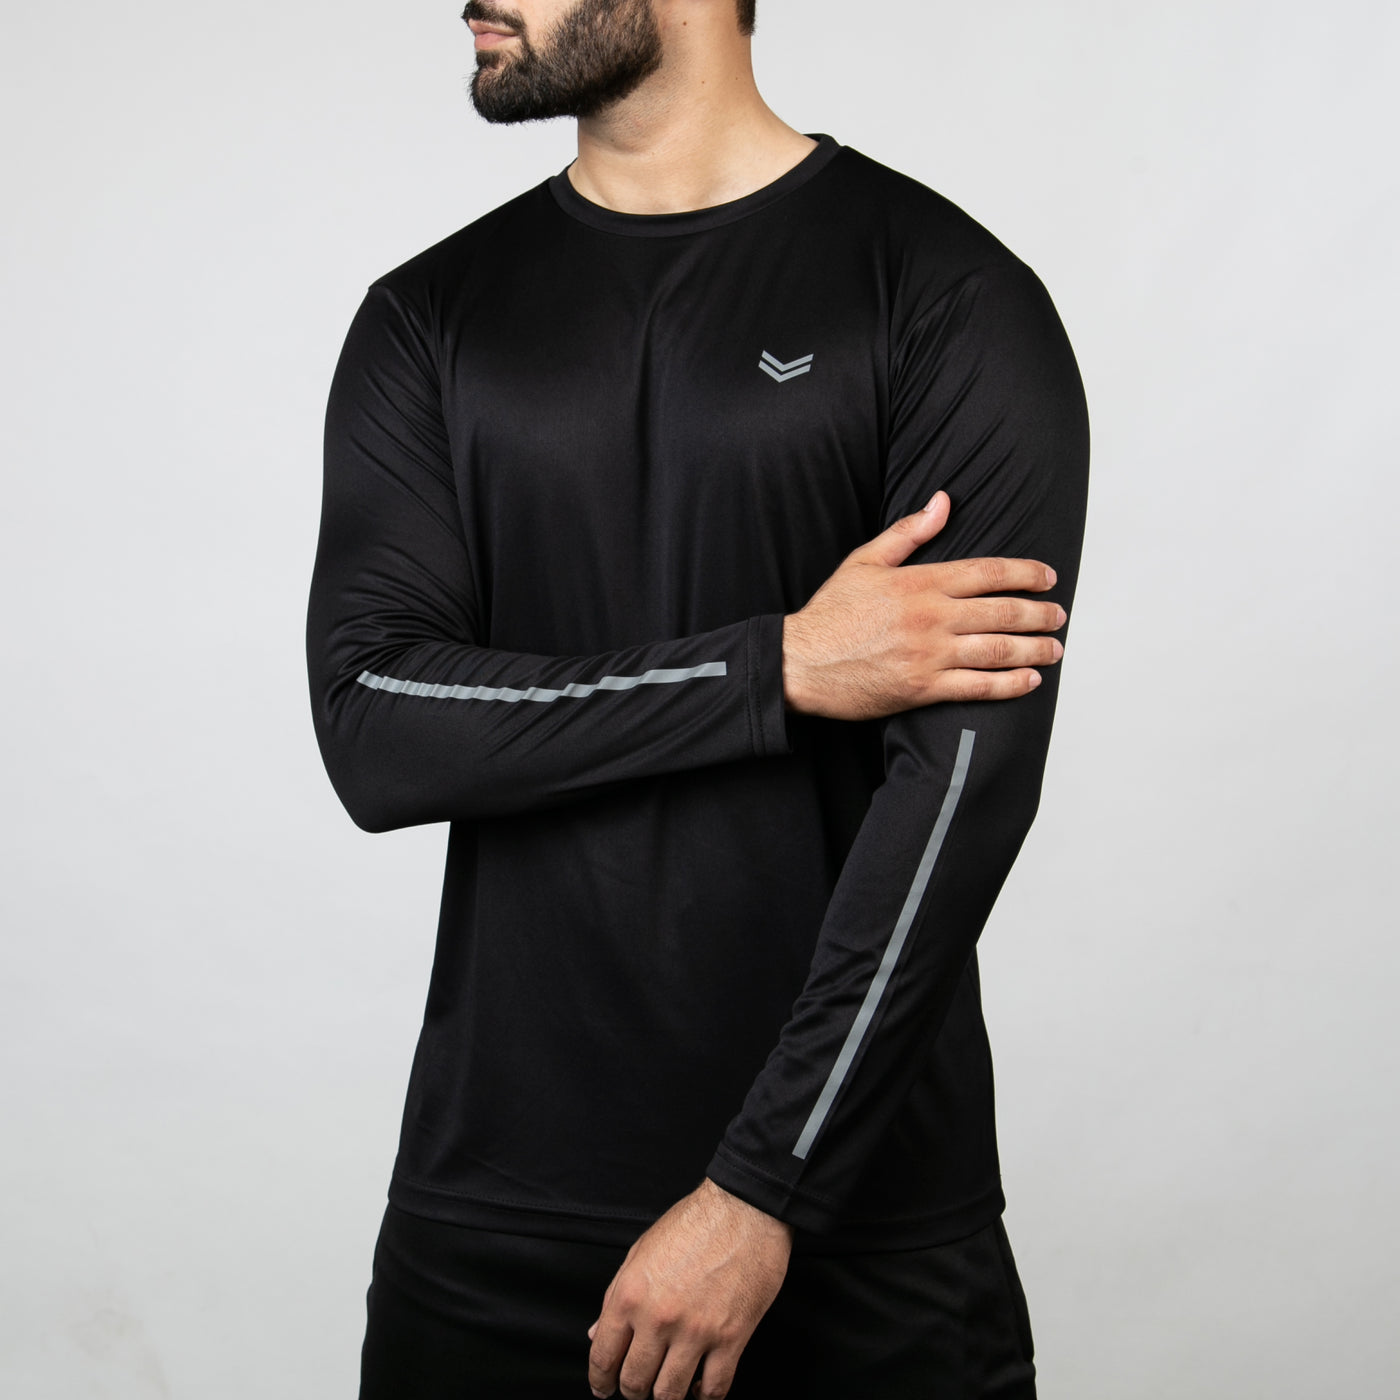 Premium Black Quick Dry Full Sleeves T-Shirt with Forearm Reflectors